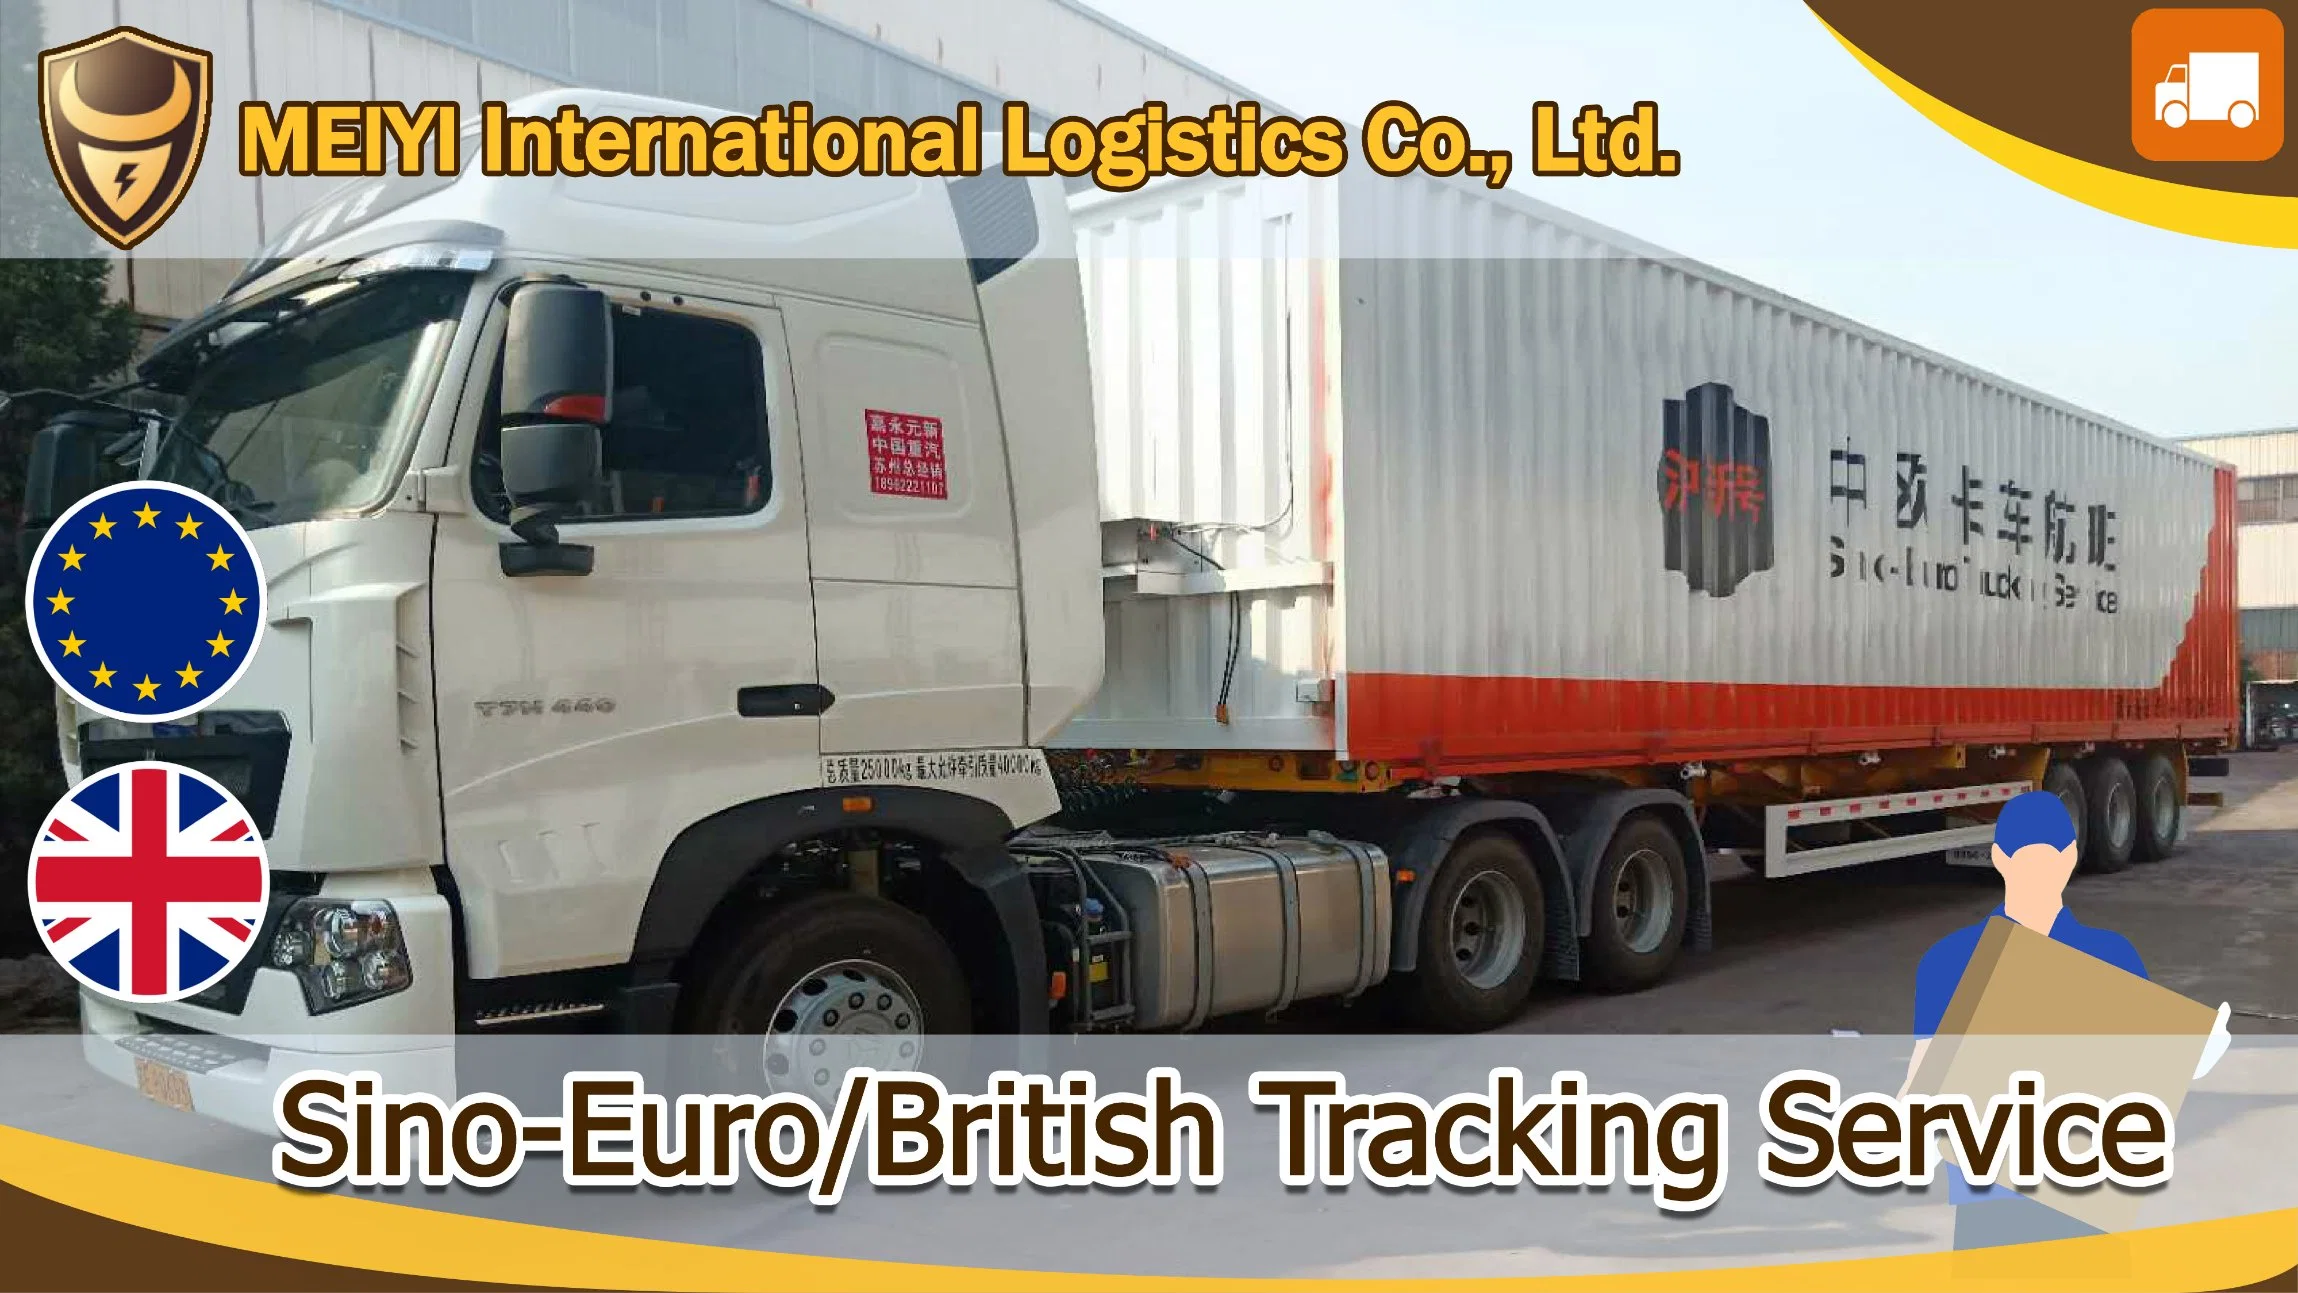 Shipping Forwarder: From China to Denmark freight forwader by europe price  by Sea/Air/Railway/Truckage Door to Door